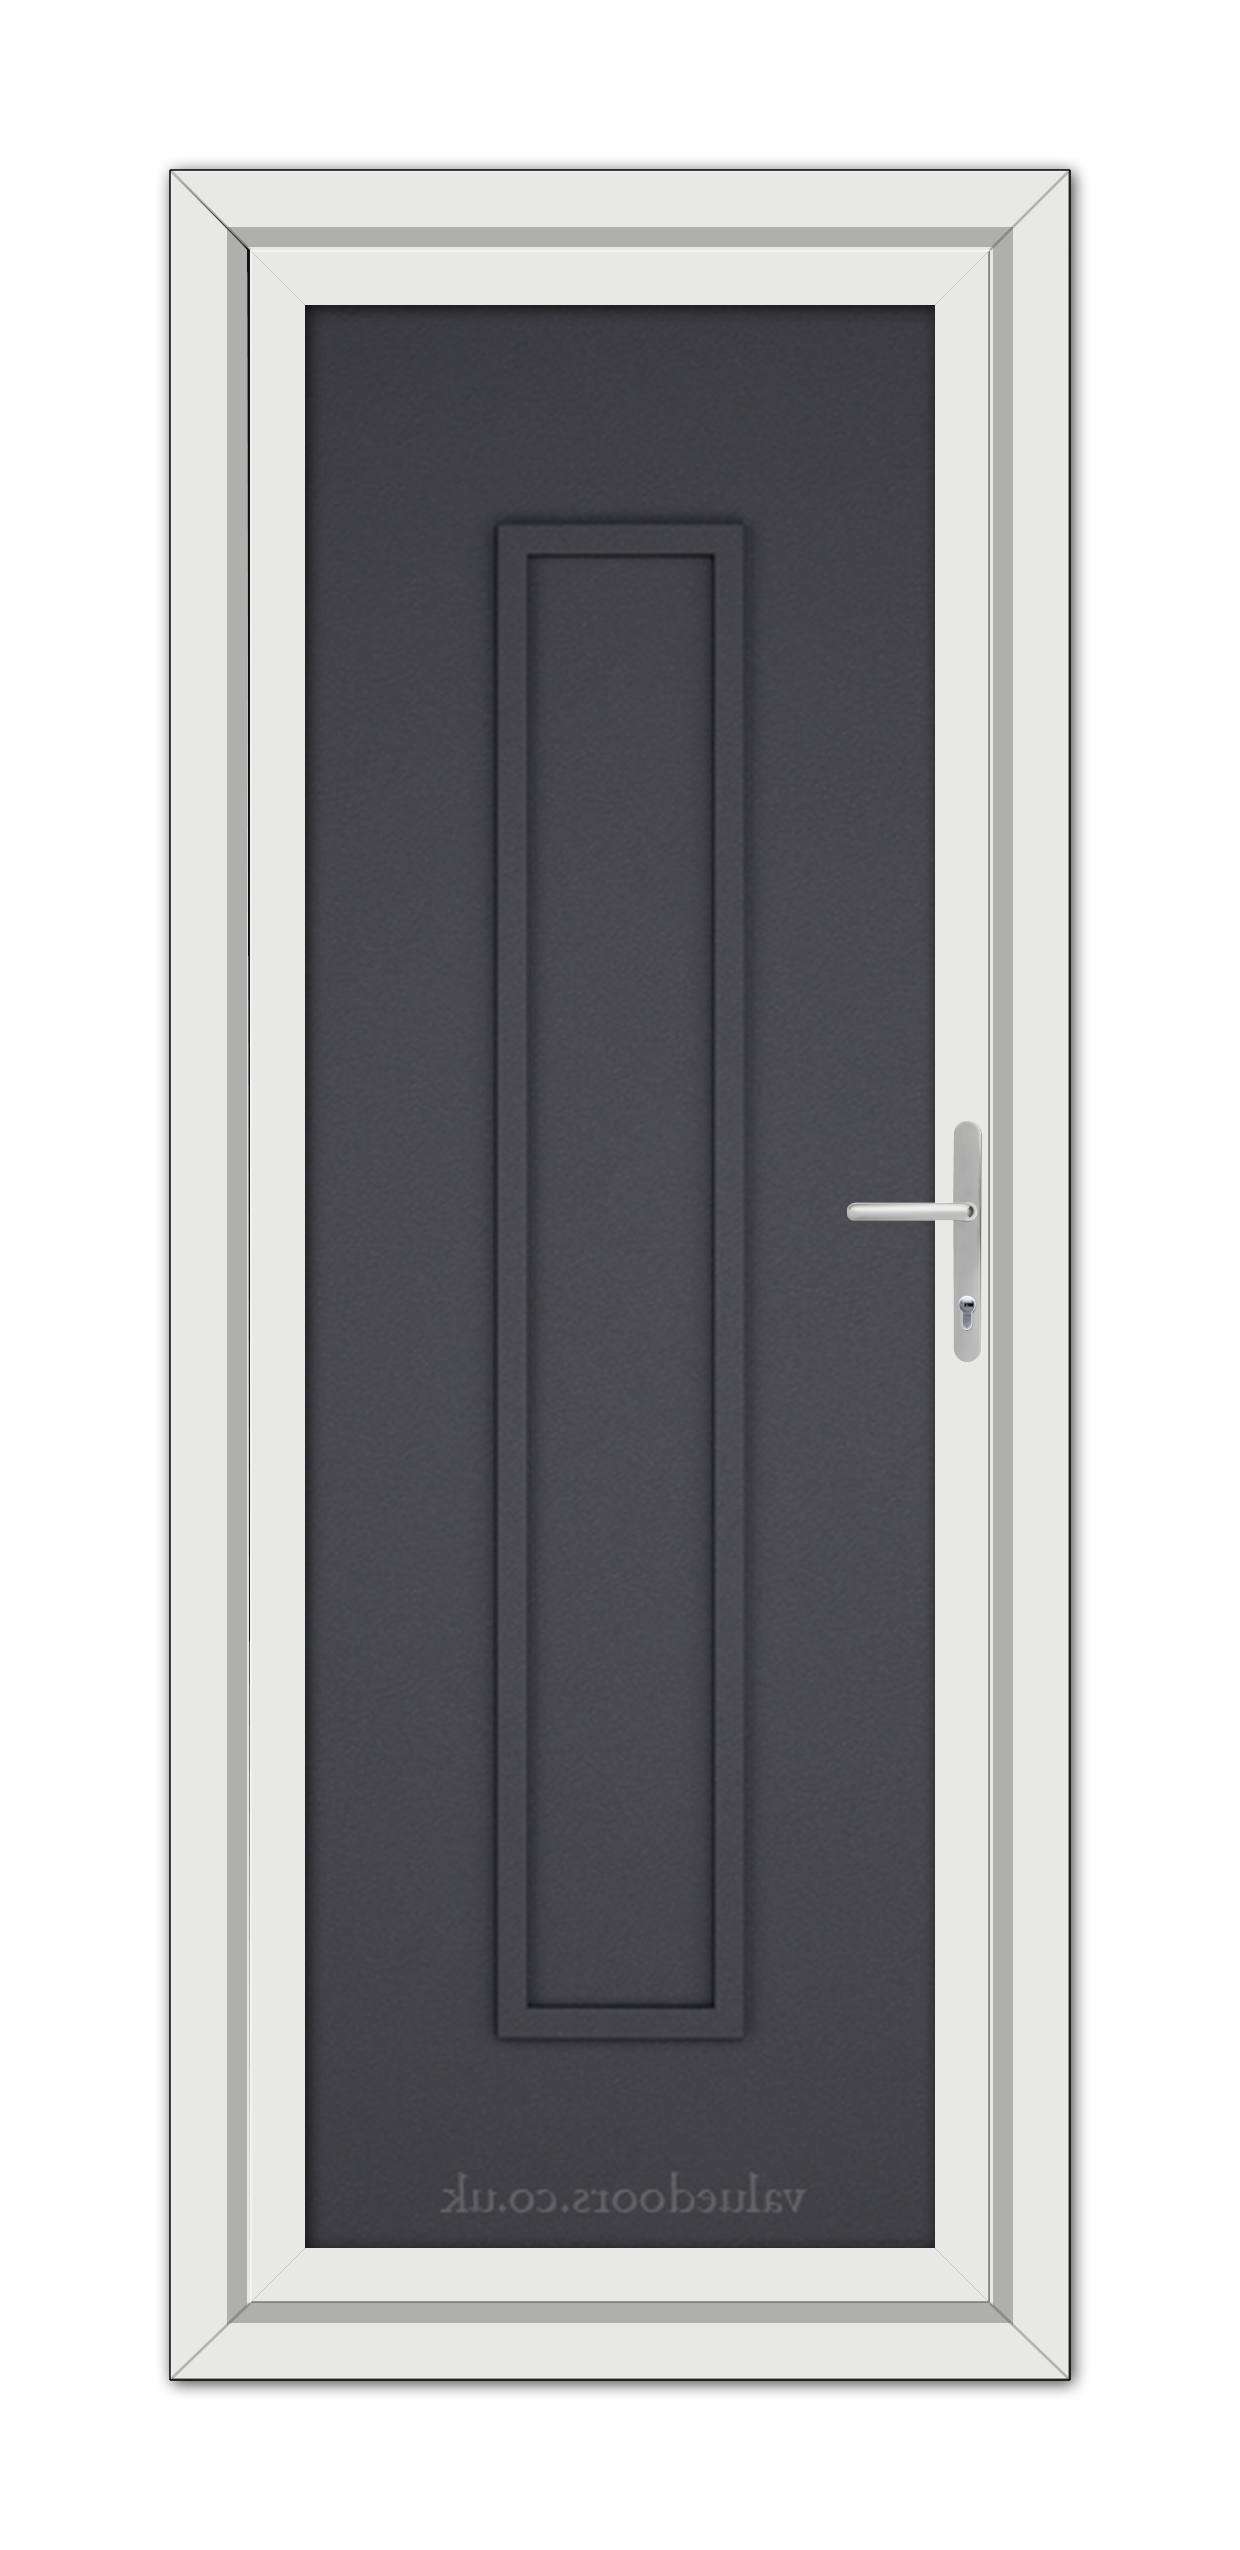 A Grey Grained Modern 5101 Solid uPVC Door featuring a centered vertical rectangular panel, framed in white, with a metallic handle on the right side.